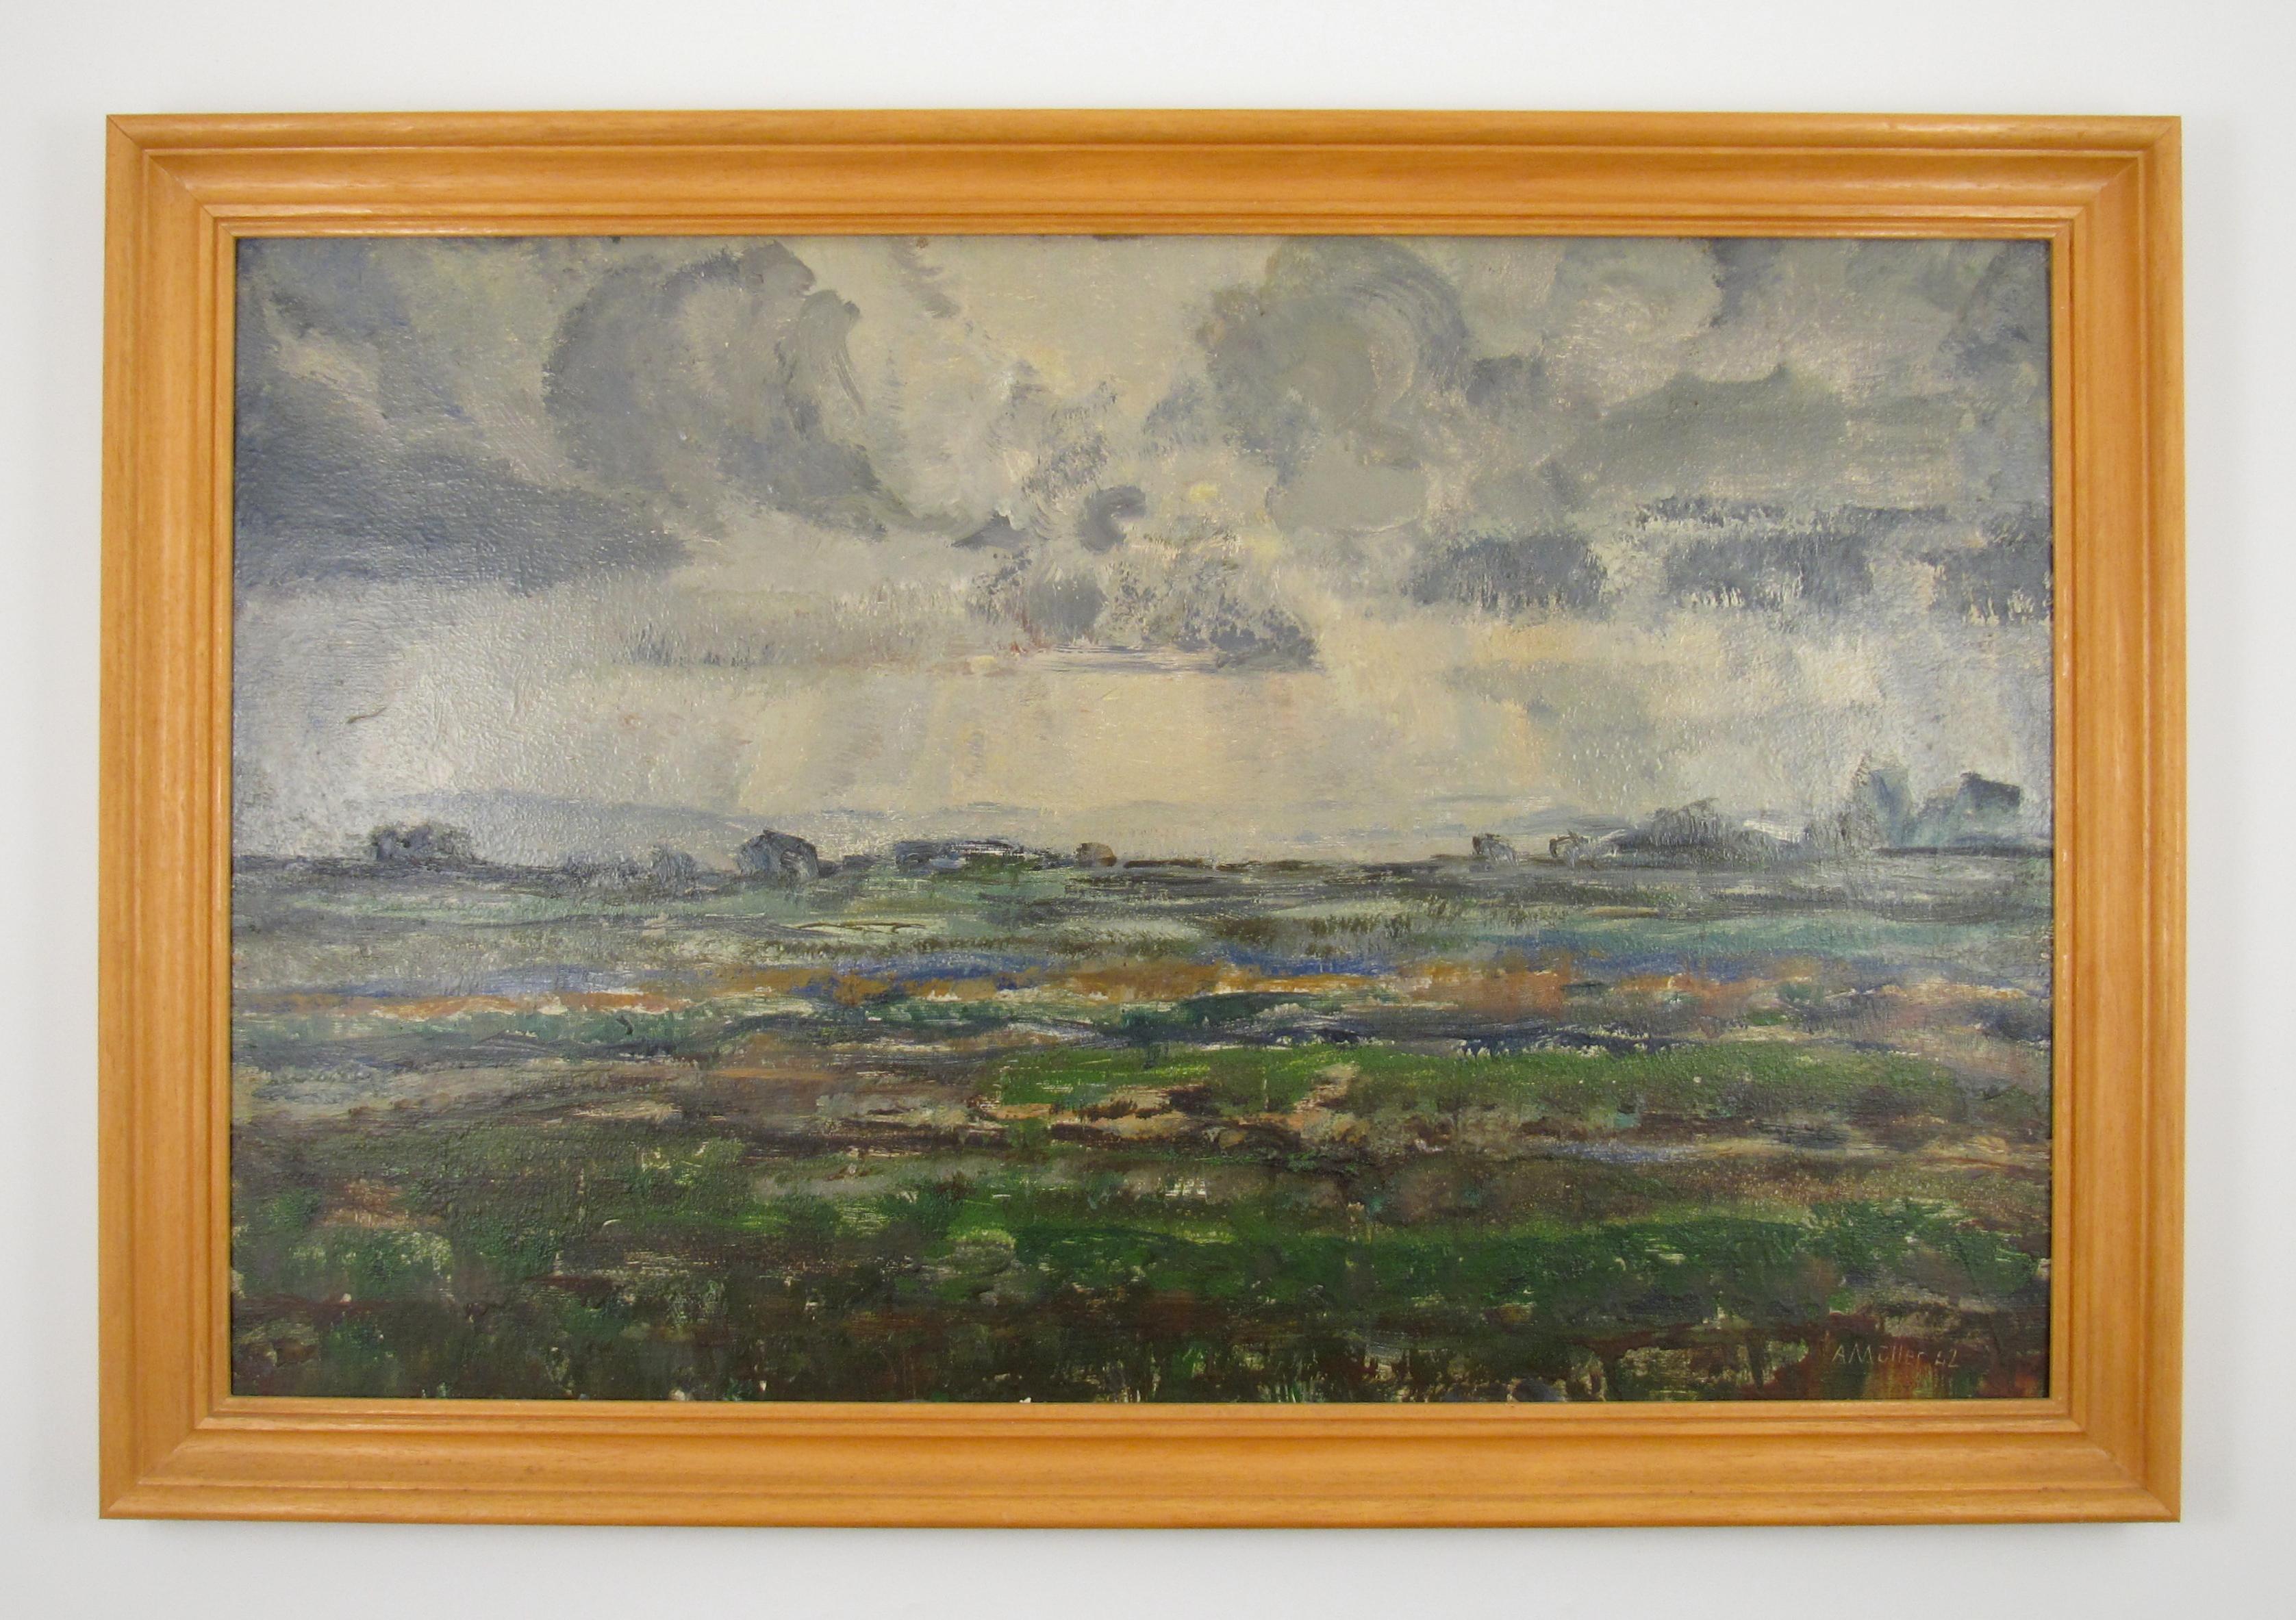 Alphons (Alfons) Müller
(Swiss, * 24.8.1898 Mitlödi, † 8.6.1955 Biel)

Stormy Lakeland Landscape in Switzerland

•	Oil on artist board, ca. 45 x 70 cm
•	Frame, ca. 49 x 75 cm
•	Signed and dated (19)42 bottom right
•	Verso a second painting of